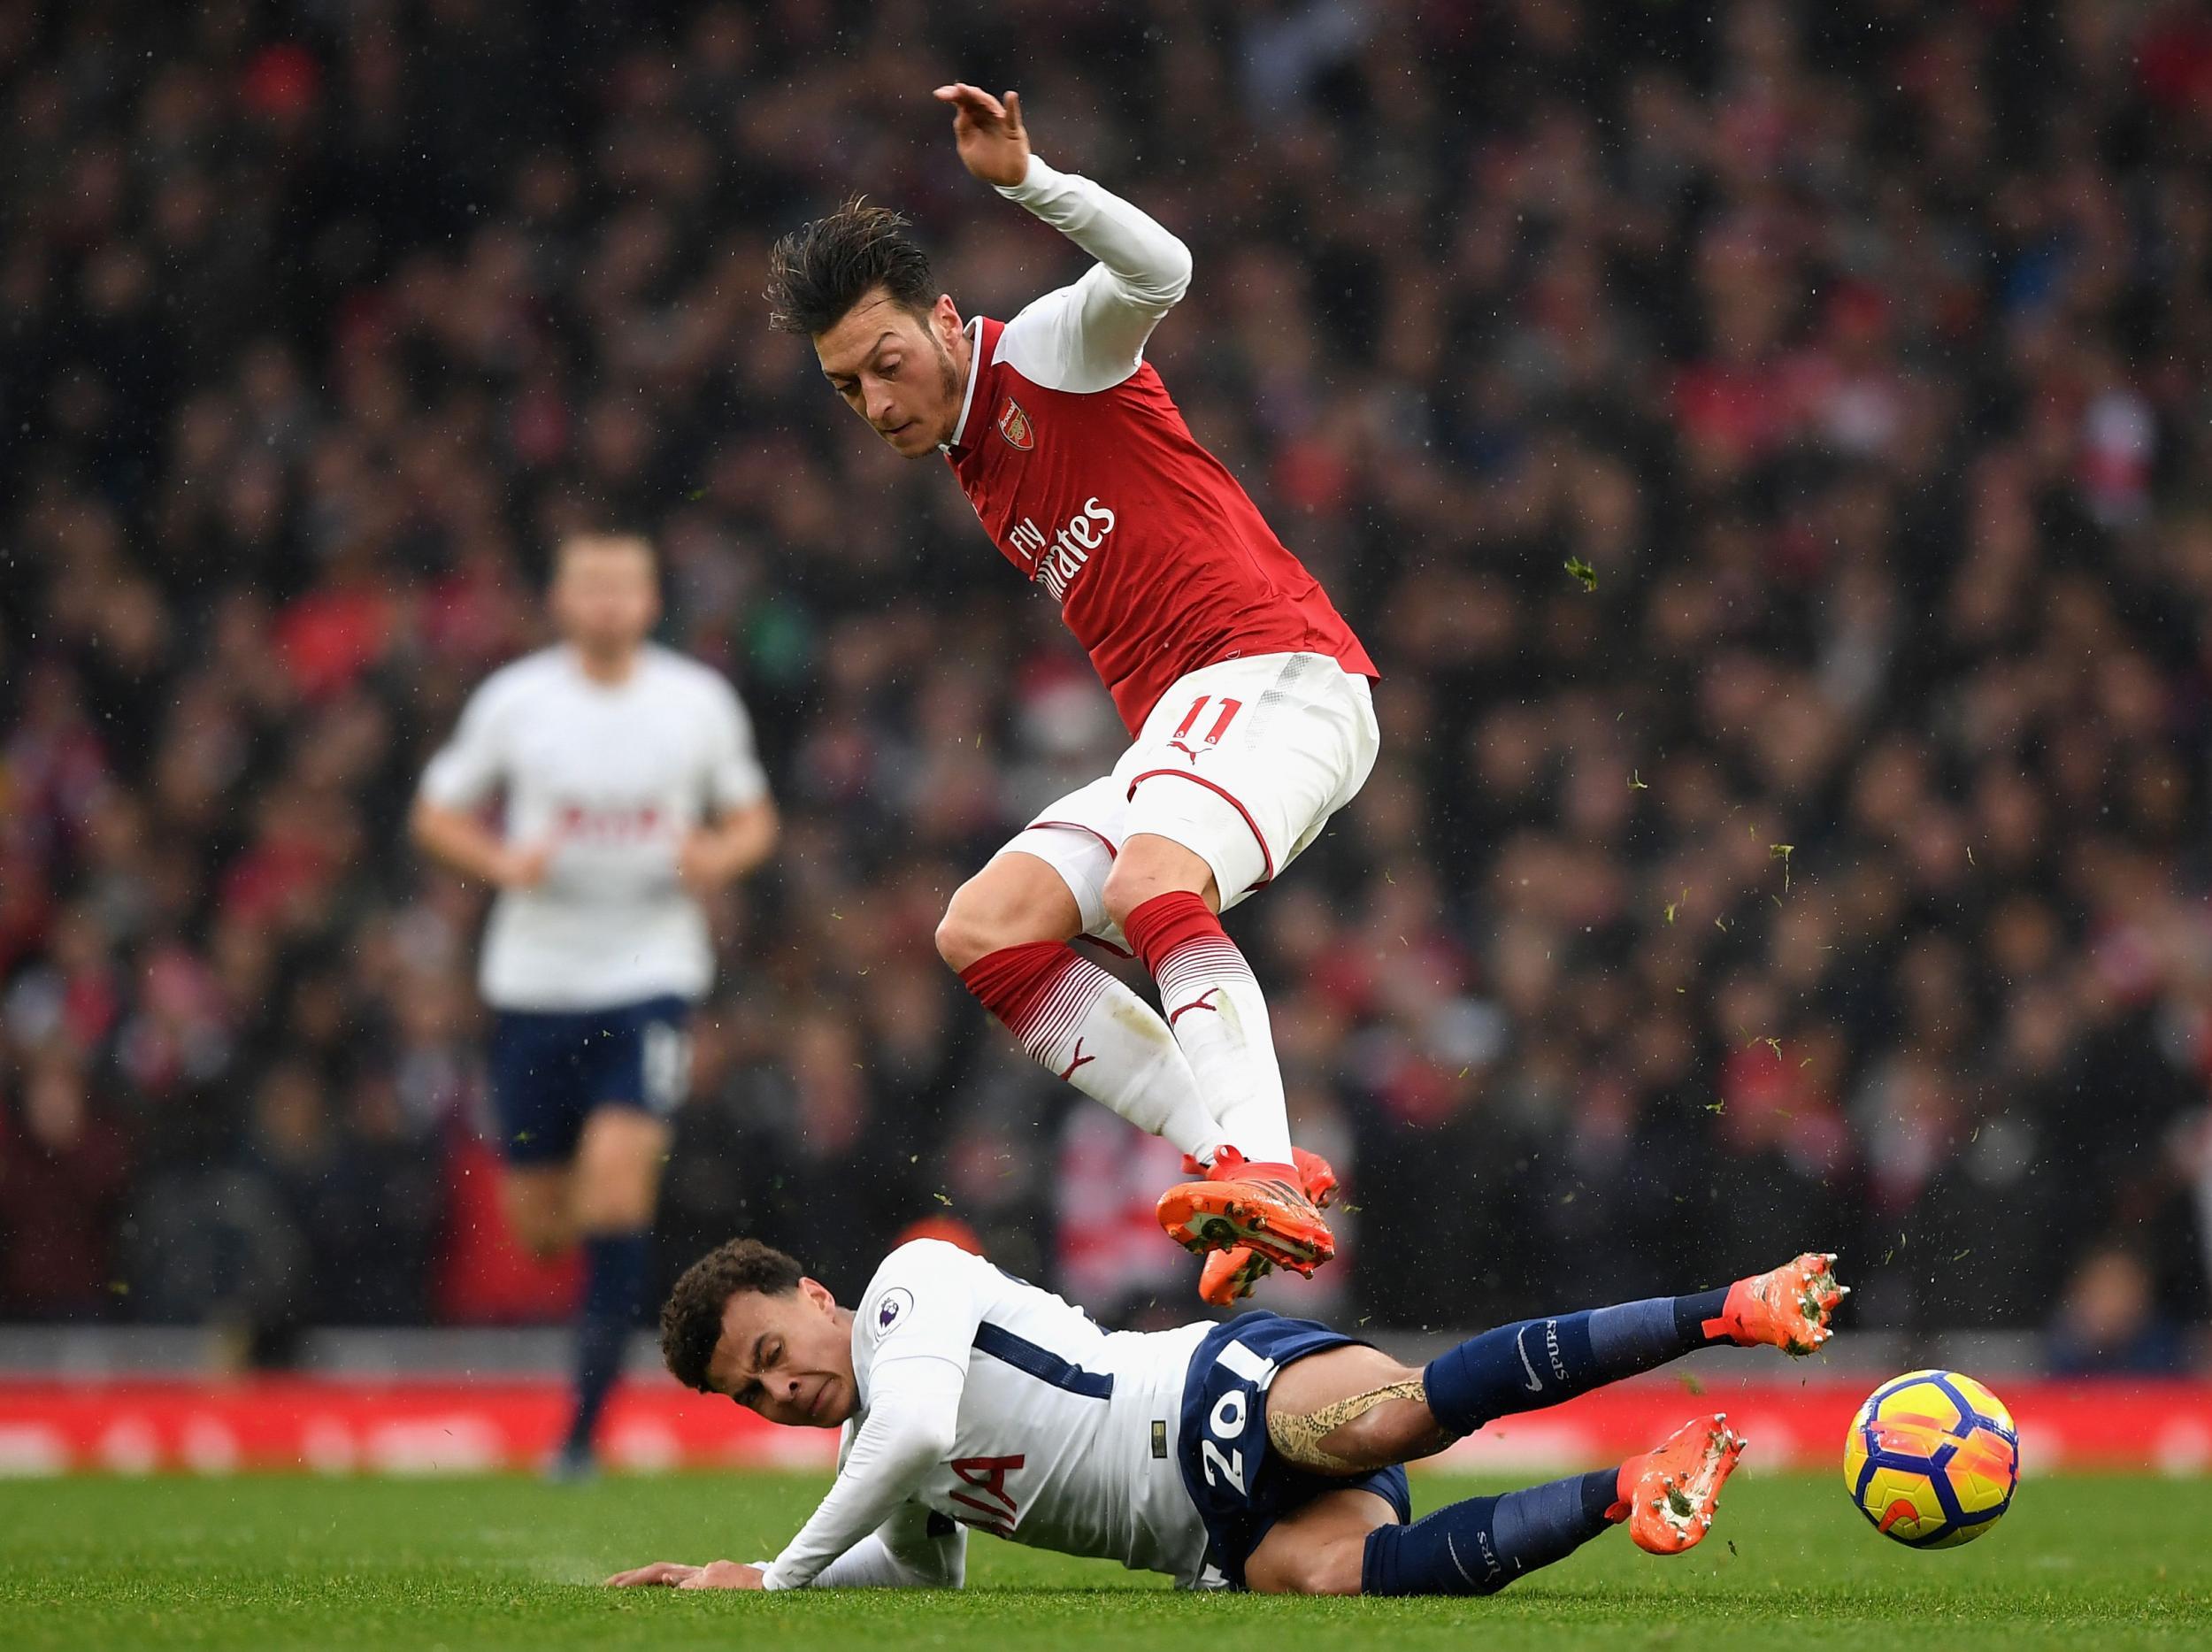 Mesut Ozil put in an assertive display for Arsenal in the north London derby